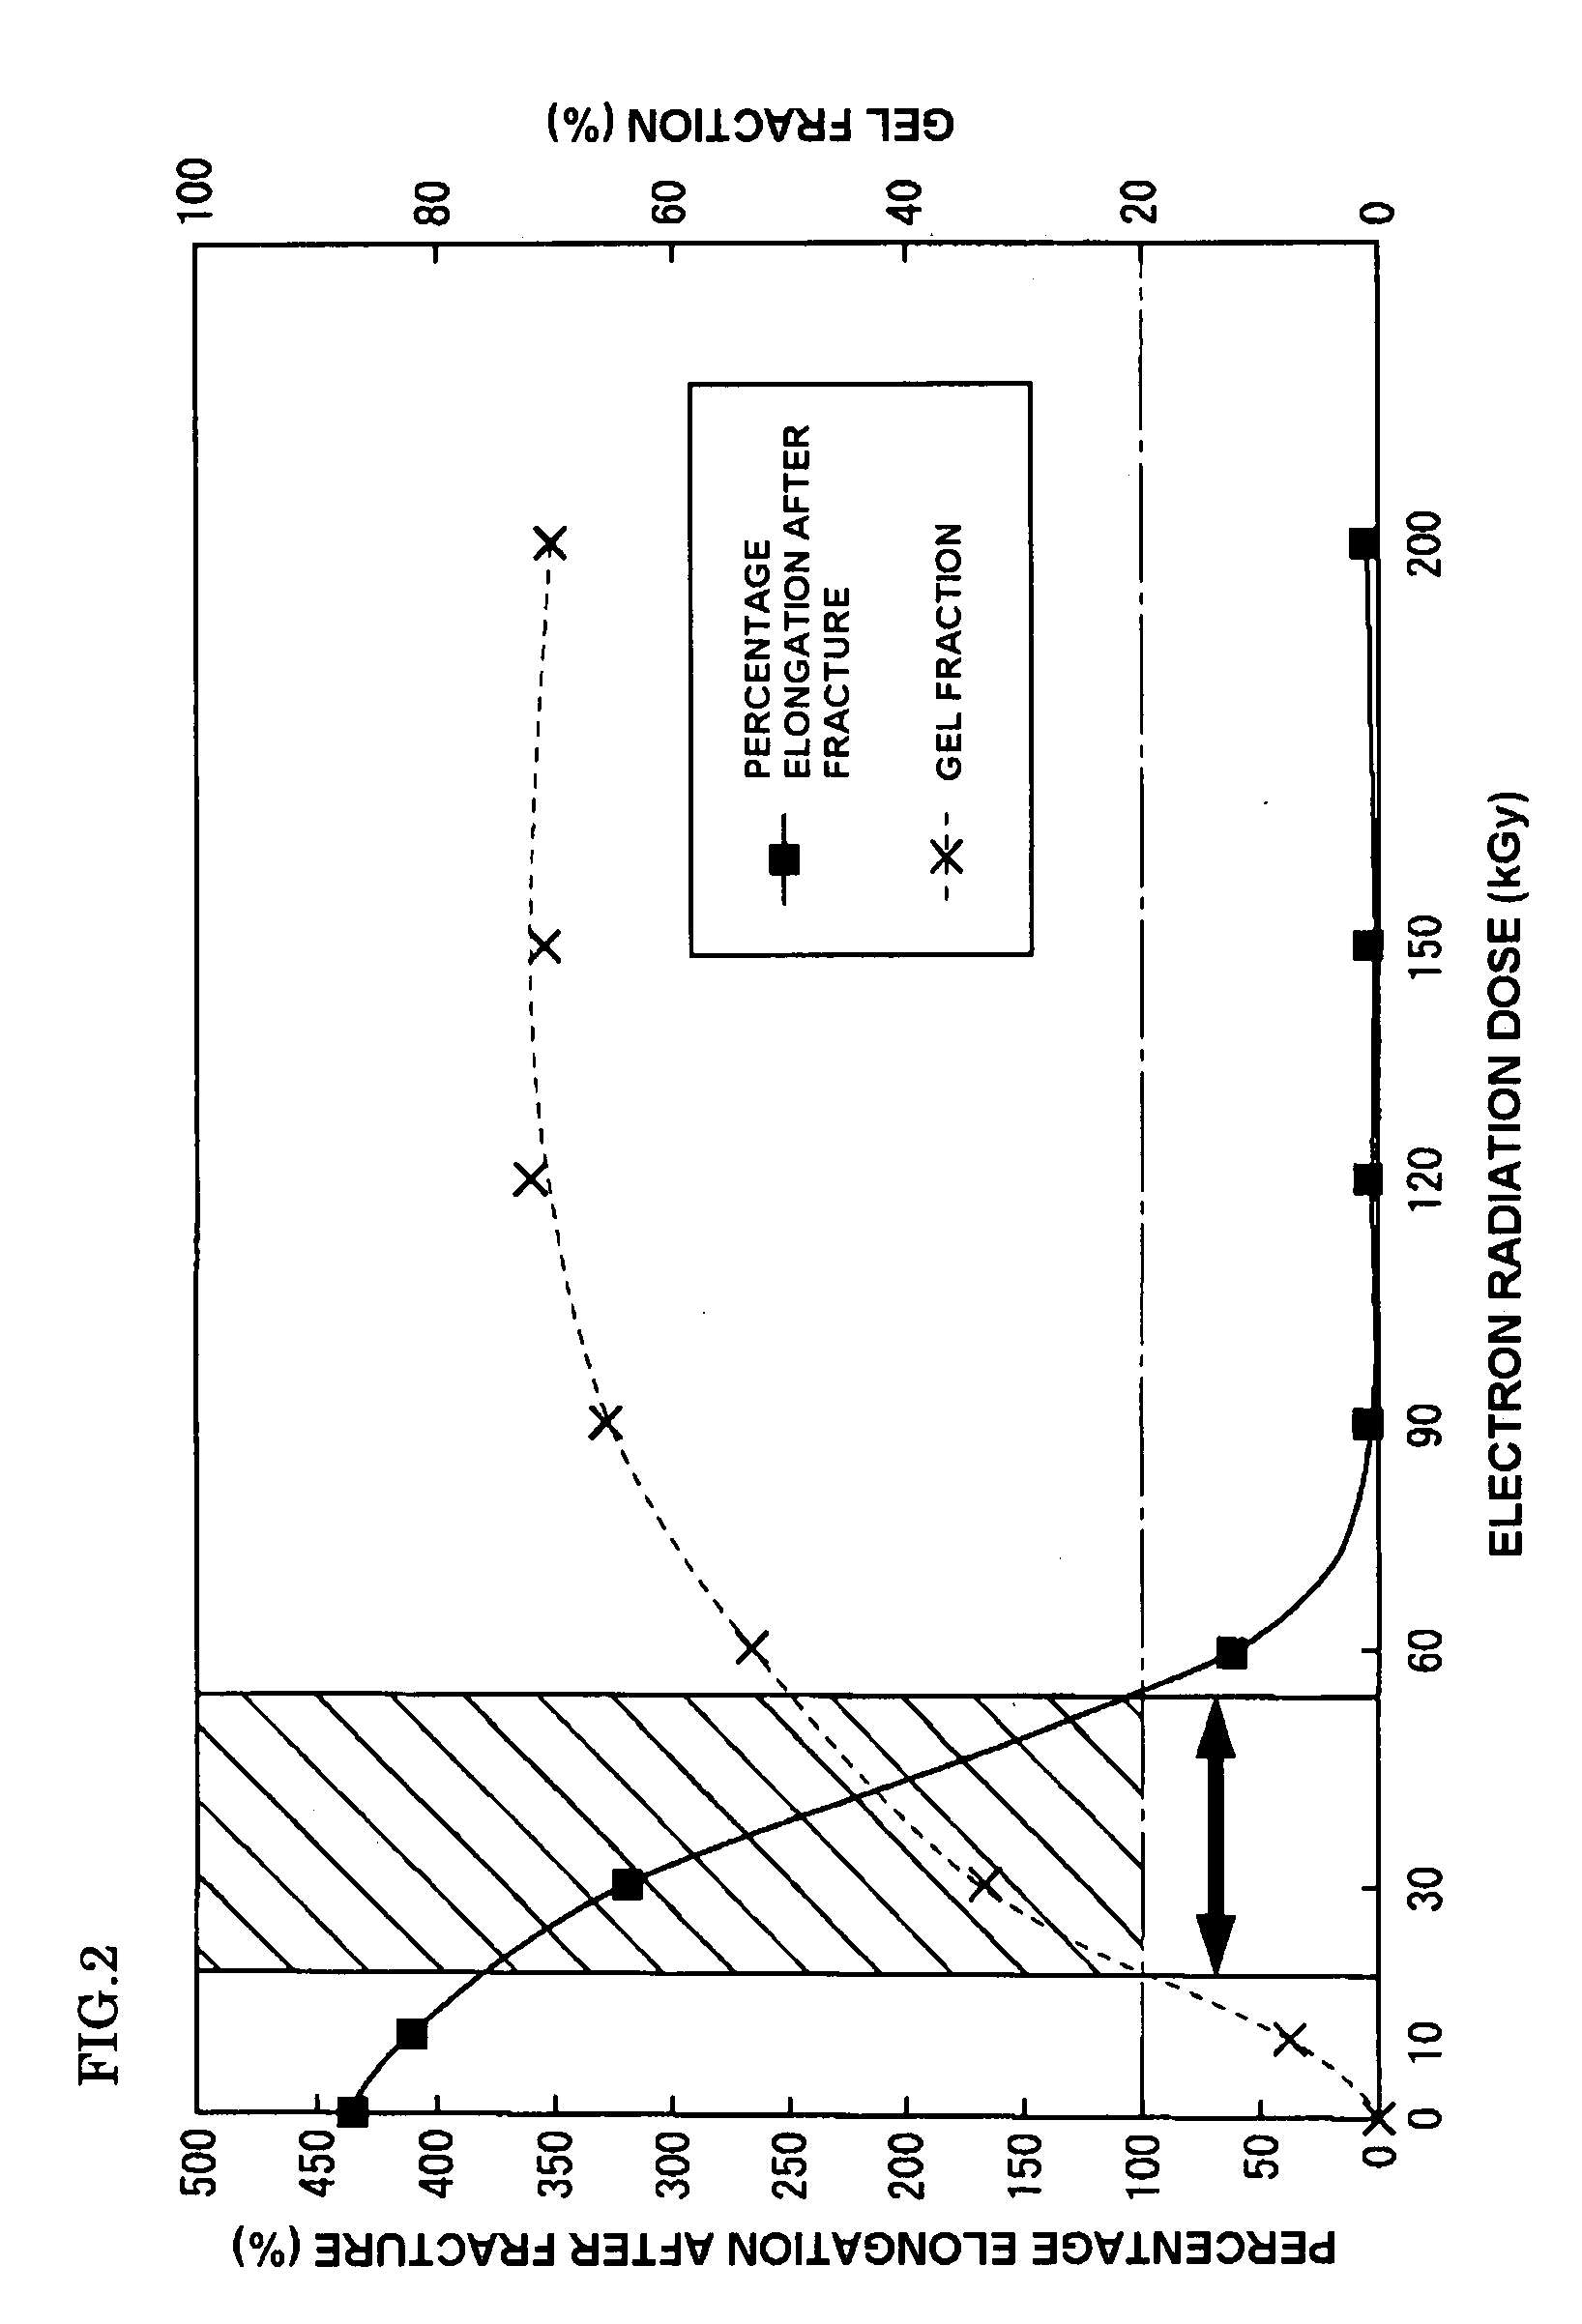 Process for Producing Cross-Linked Material of Polylactic Acid and Cross-Linked Material of Polylactic Acid